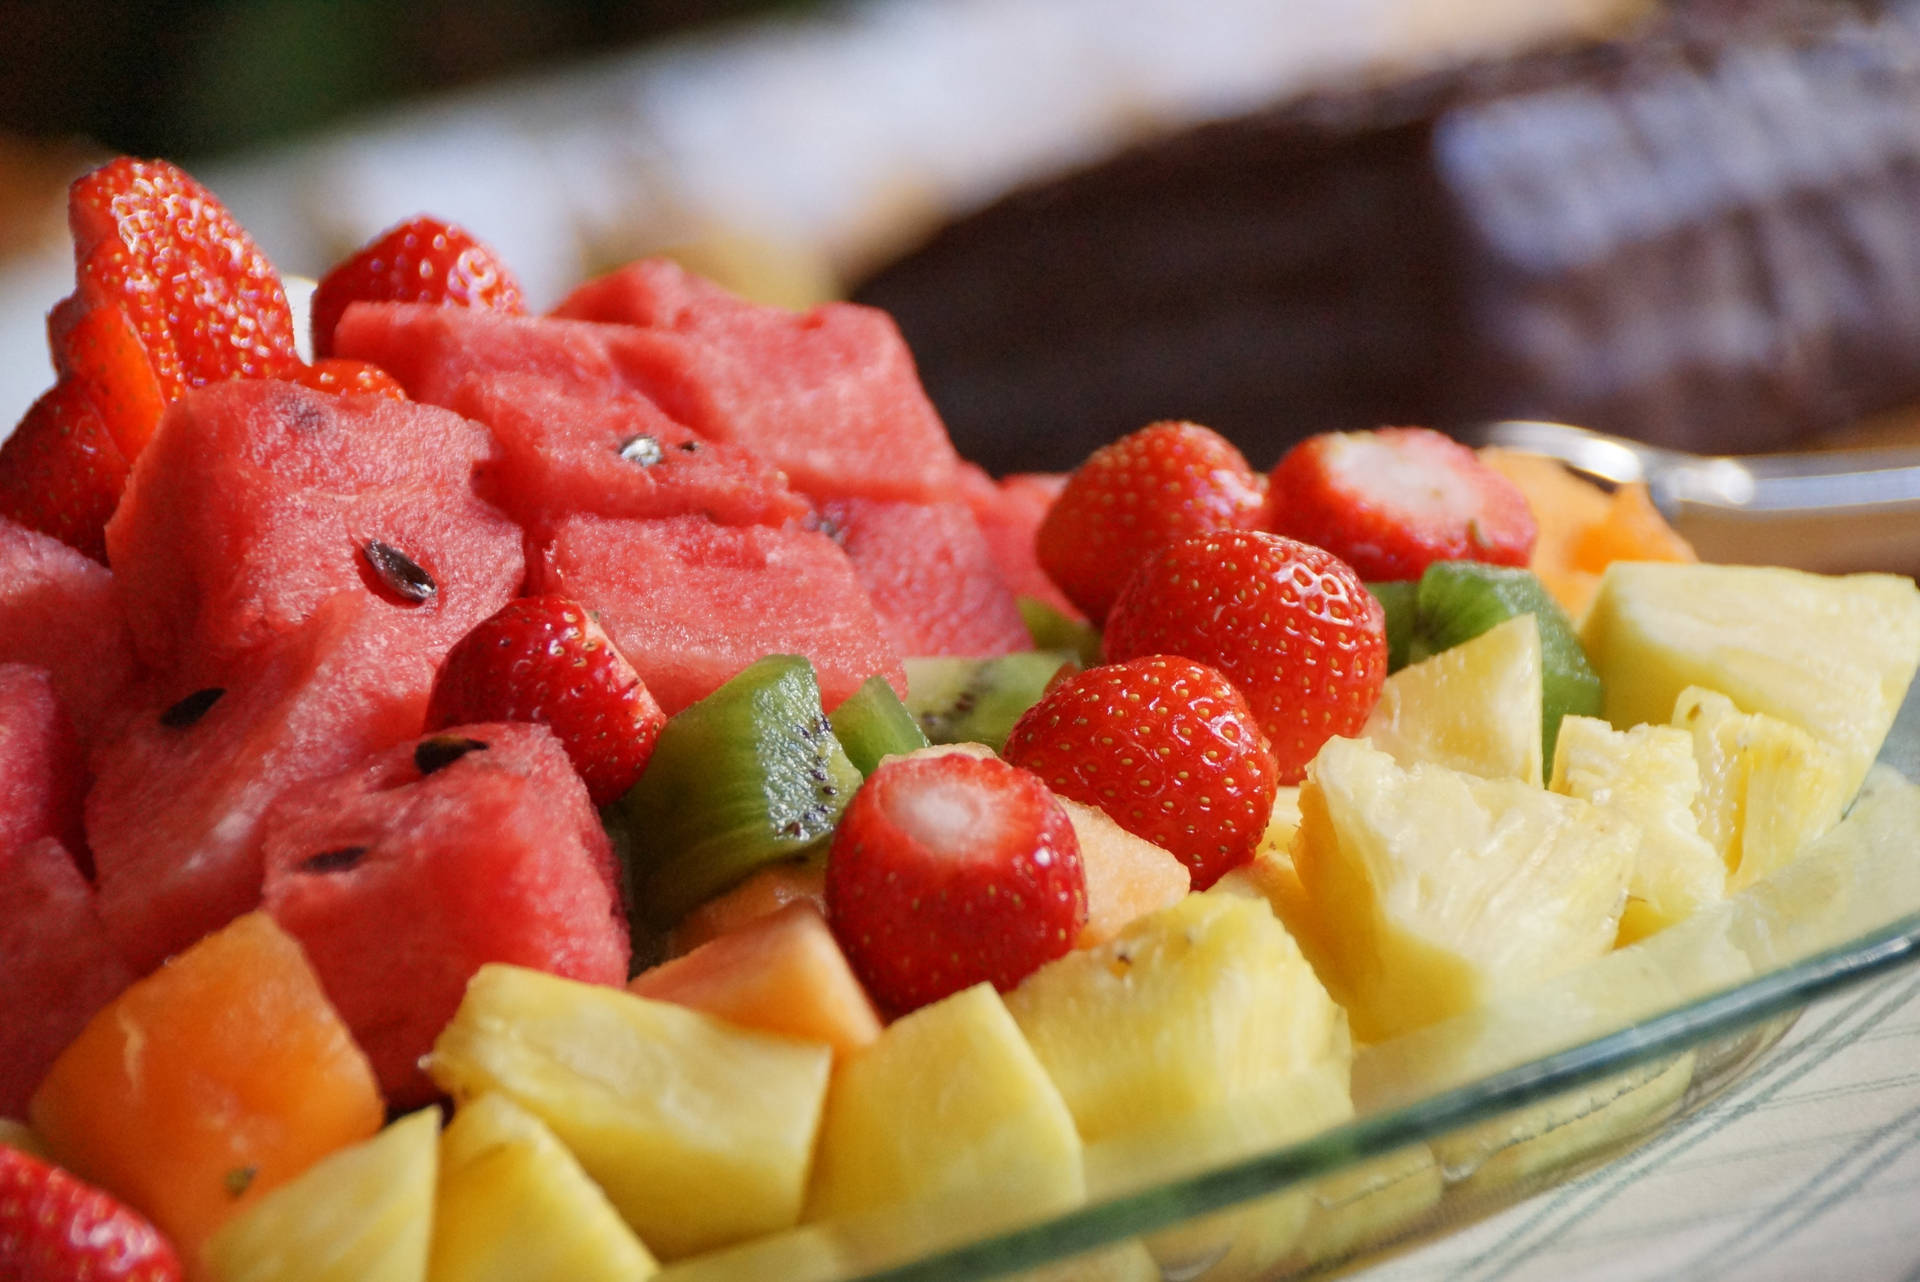 Enjoy A Healthy And Delicious Fruit Salad Featuring Sweet Pineapple. Background